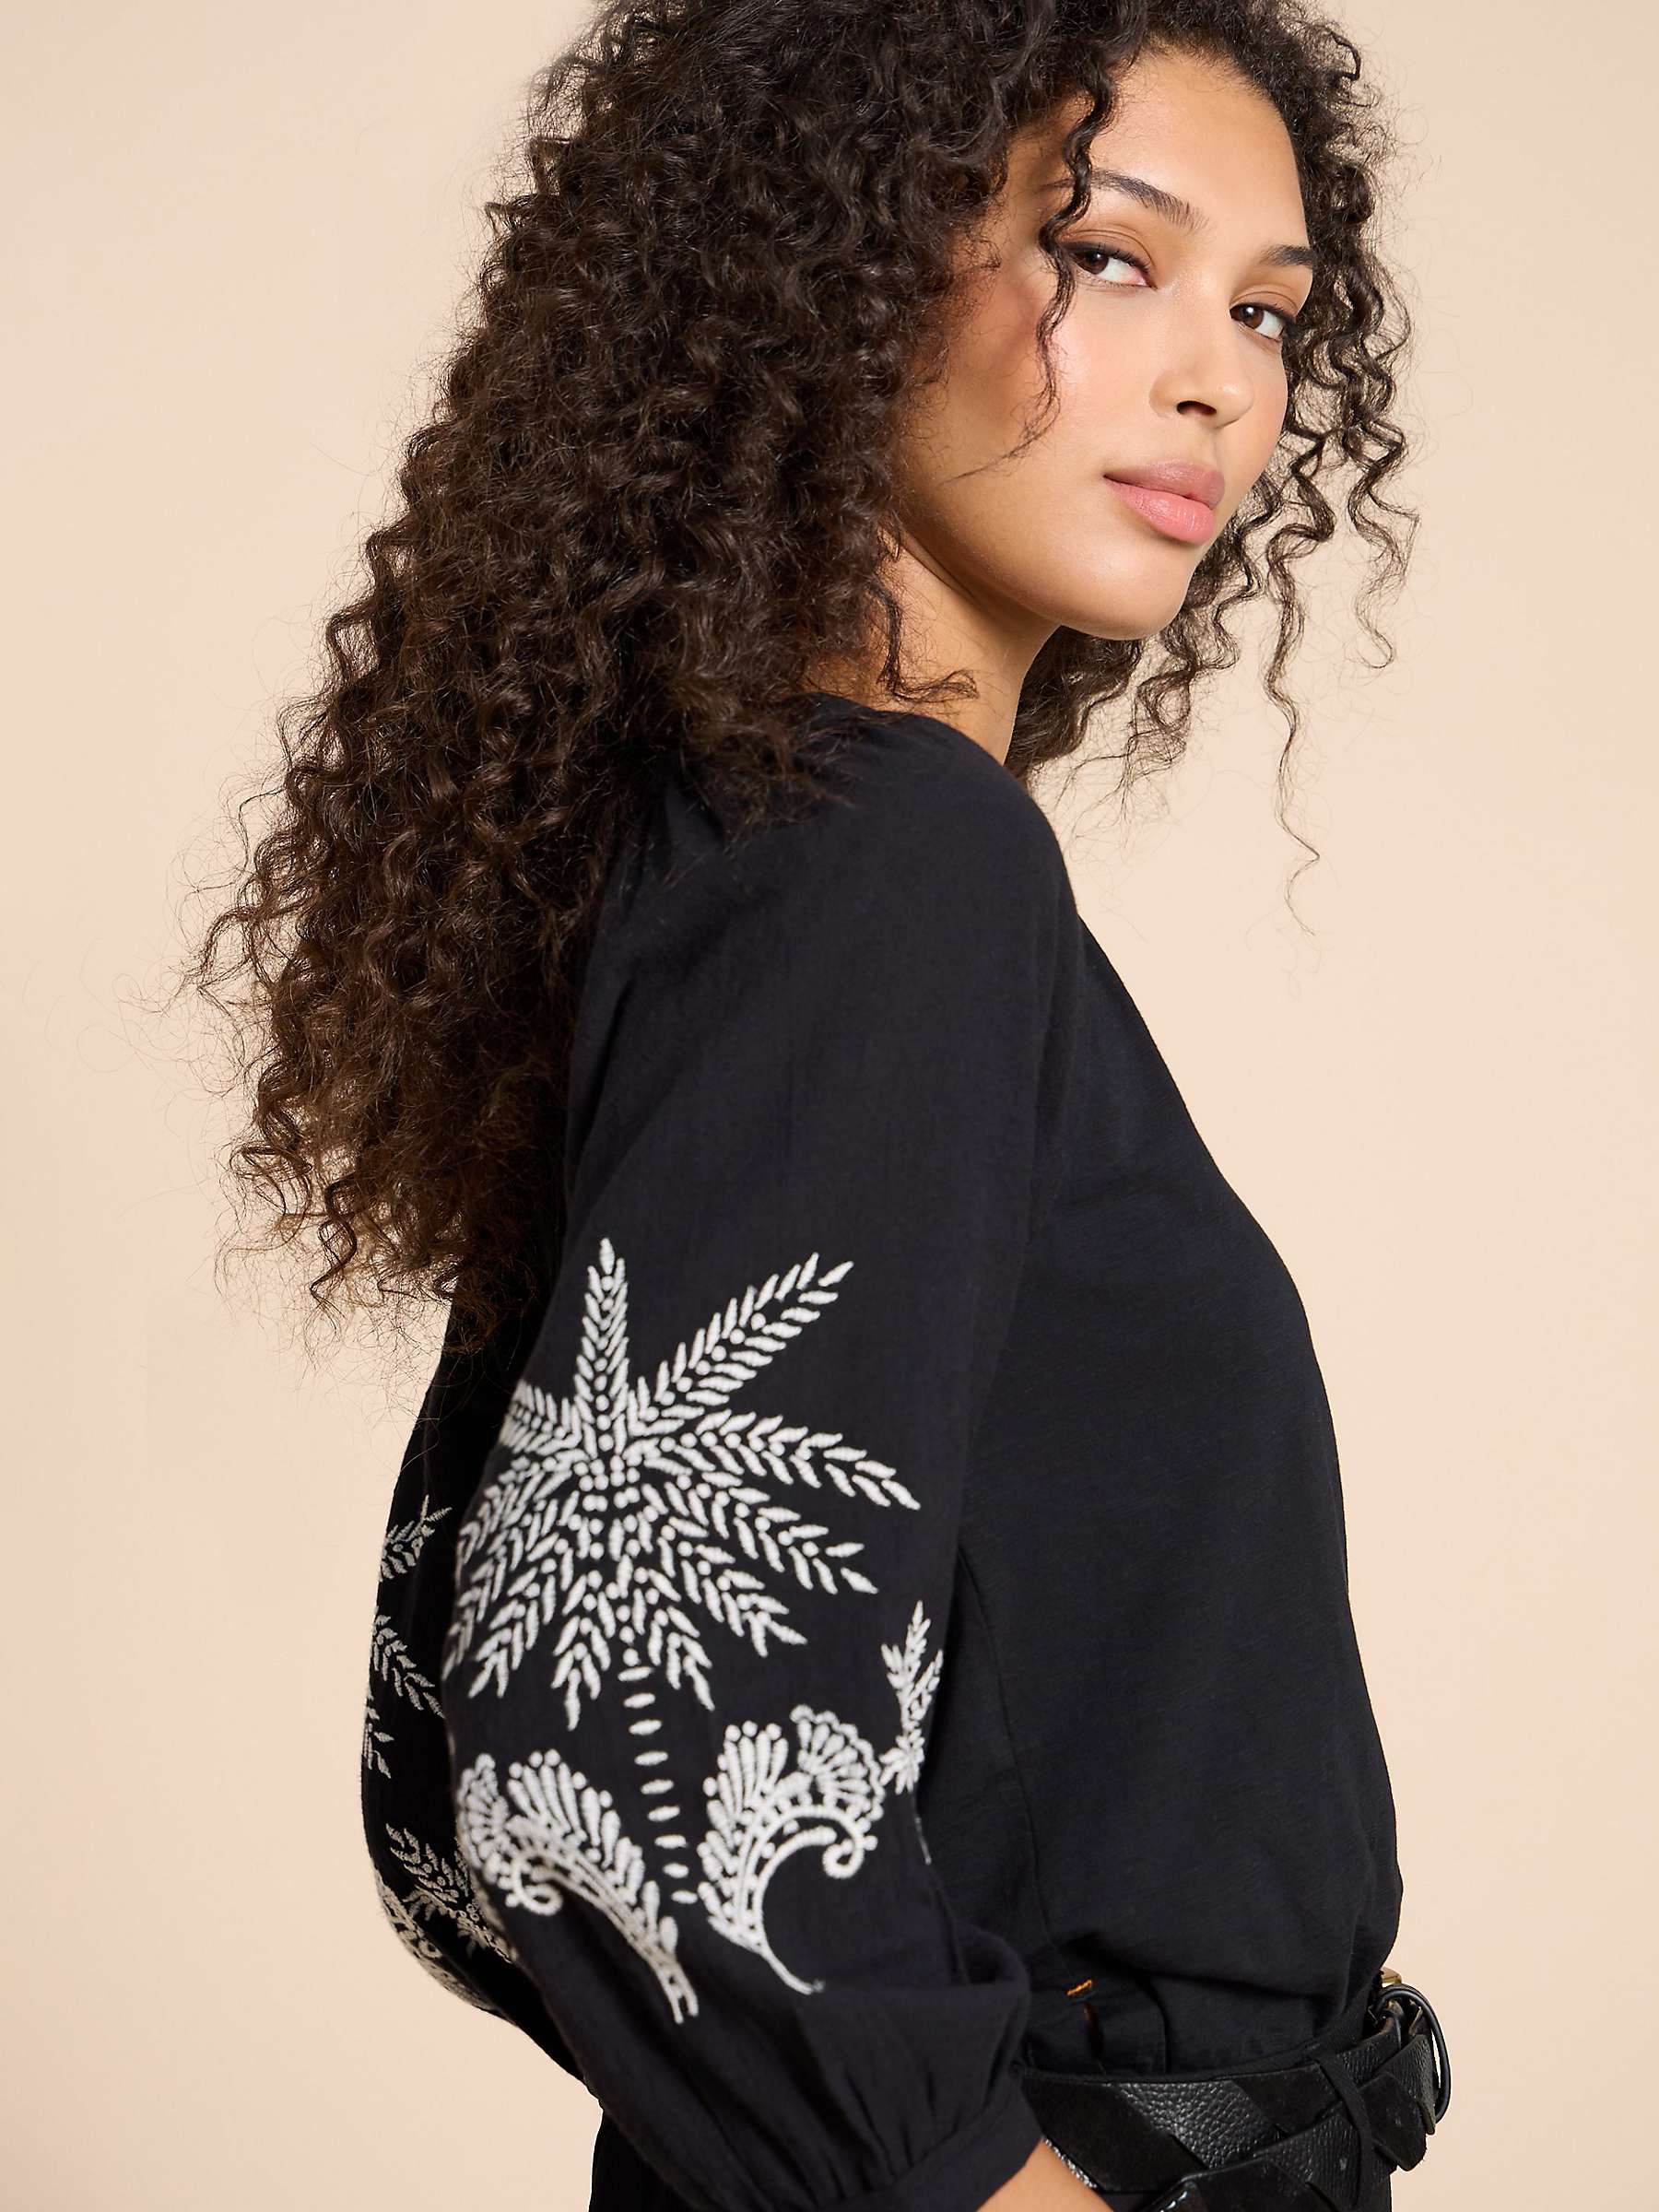 Buy White Stuff Millie Embroidered Sleeve Top, Black/Multi Online at johnlewis.com